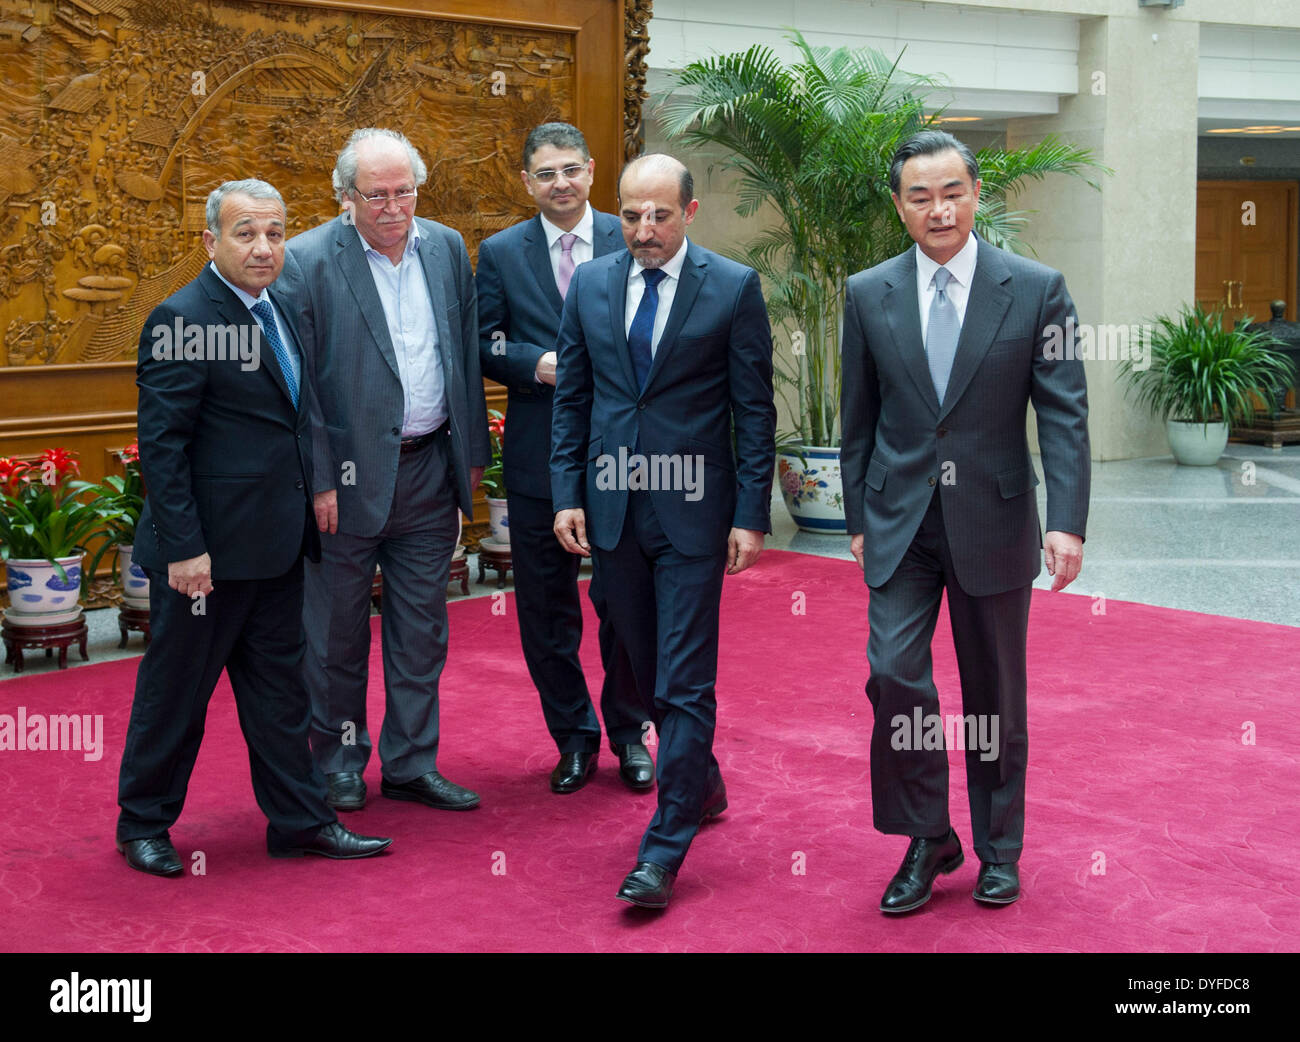 Beijing, China. 16th Apr, 2014. Chinese Foreign Minister Wang Yi (1st R) meets with Jarba (2nd R), head of the National Coalition of Syrian Opposition and Revolutionary Forces, in Beijing, China, April 16, 2014. © Wang Ye/Xinhua/Alamy Live News Stock Photo